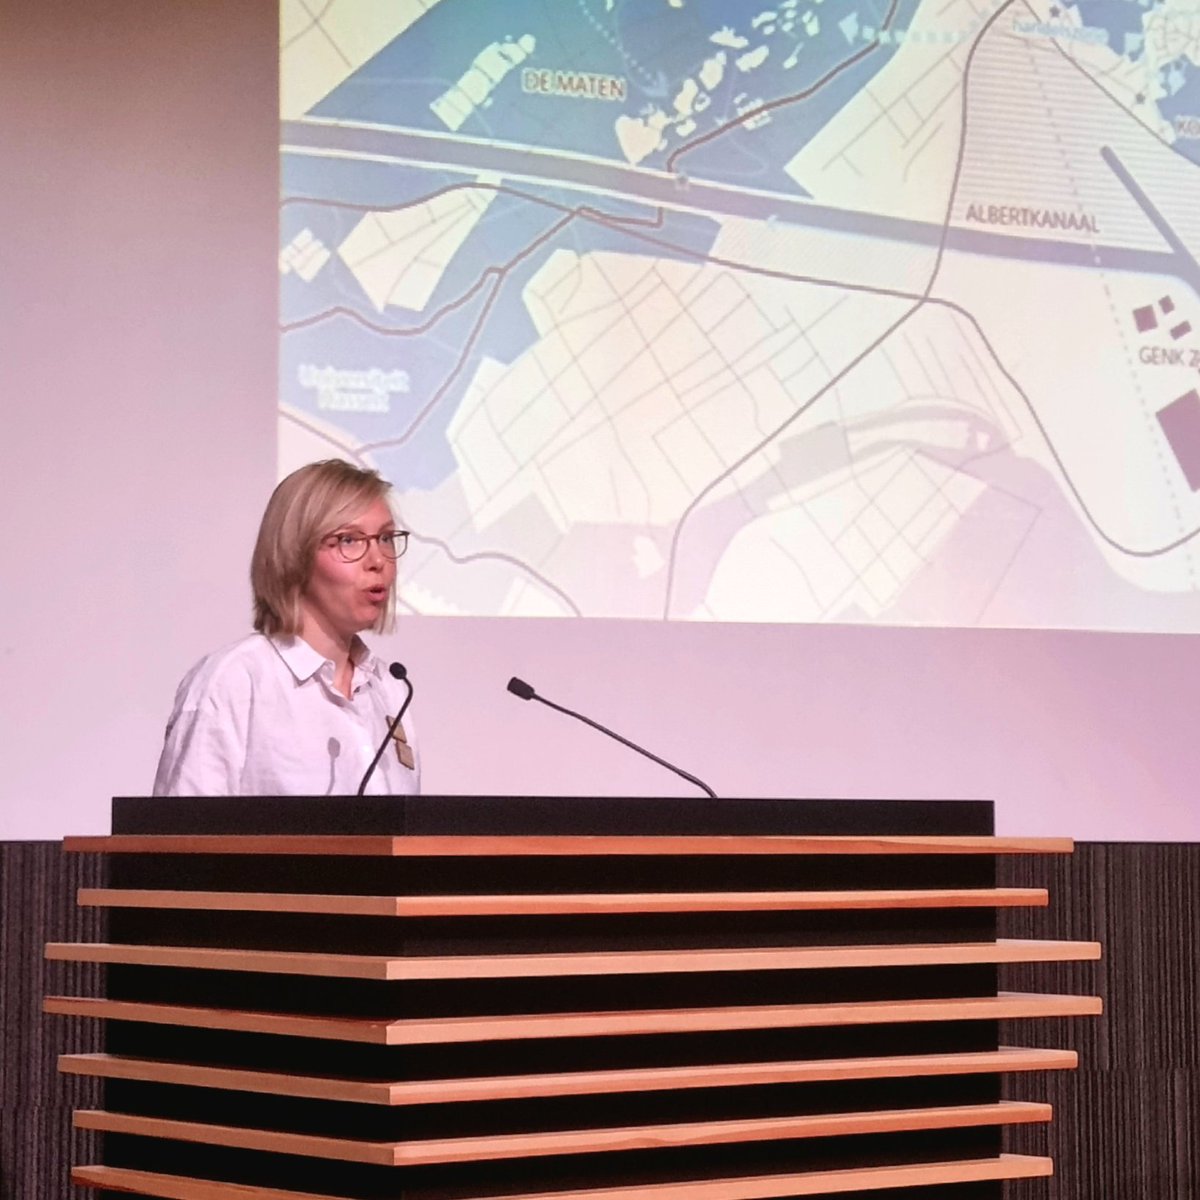 Our host Katrien from @stadgenk shares their @connectingnbs experience in planning and delivering the Stiemer Valley @NatureBasedSolution #connectingnaturesummit